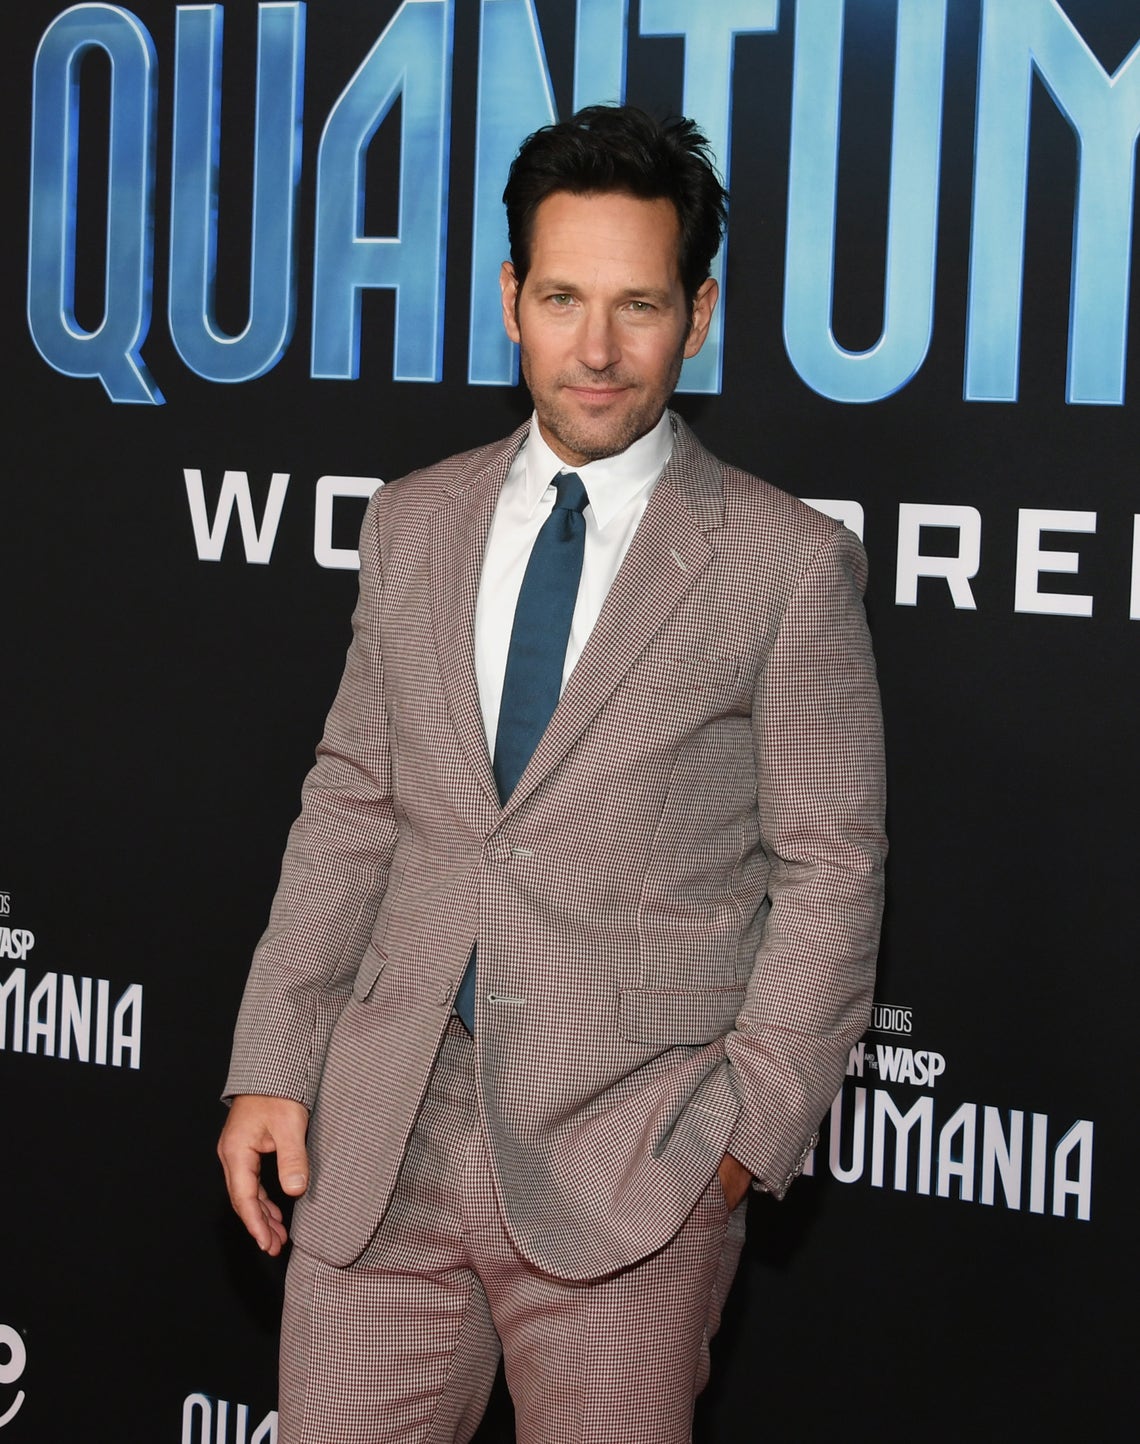 Ant-Man and the Wasp: Quantumania': Best World Premiere Photos